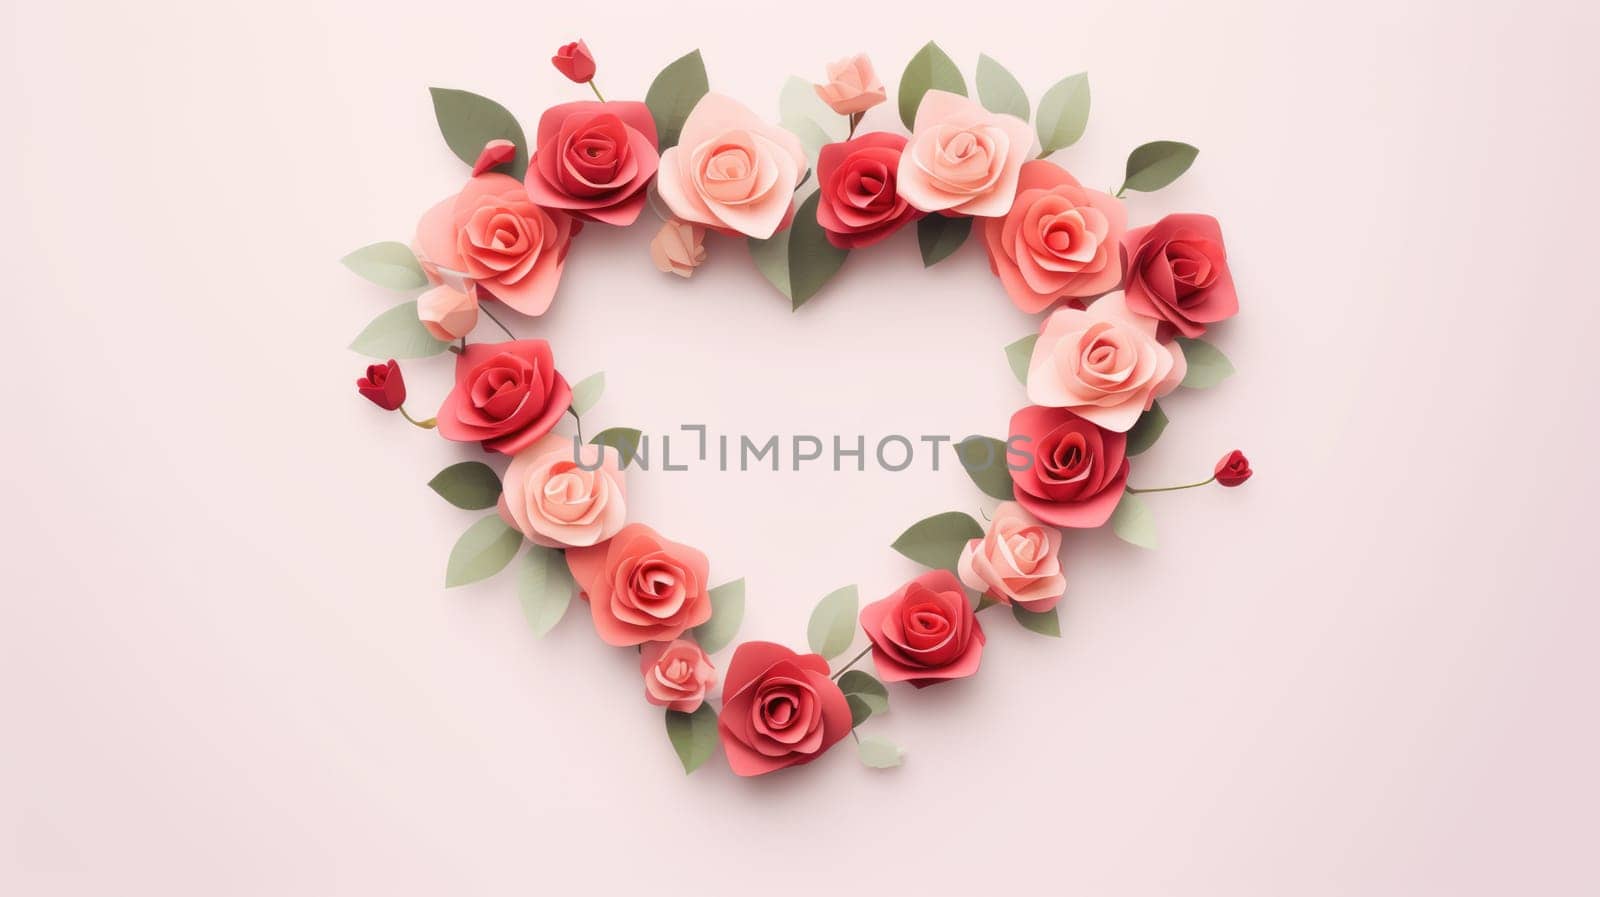 Heart symbol made of flowers and leaves on white background. Valentine's day card. by JuliaDorian